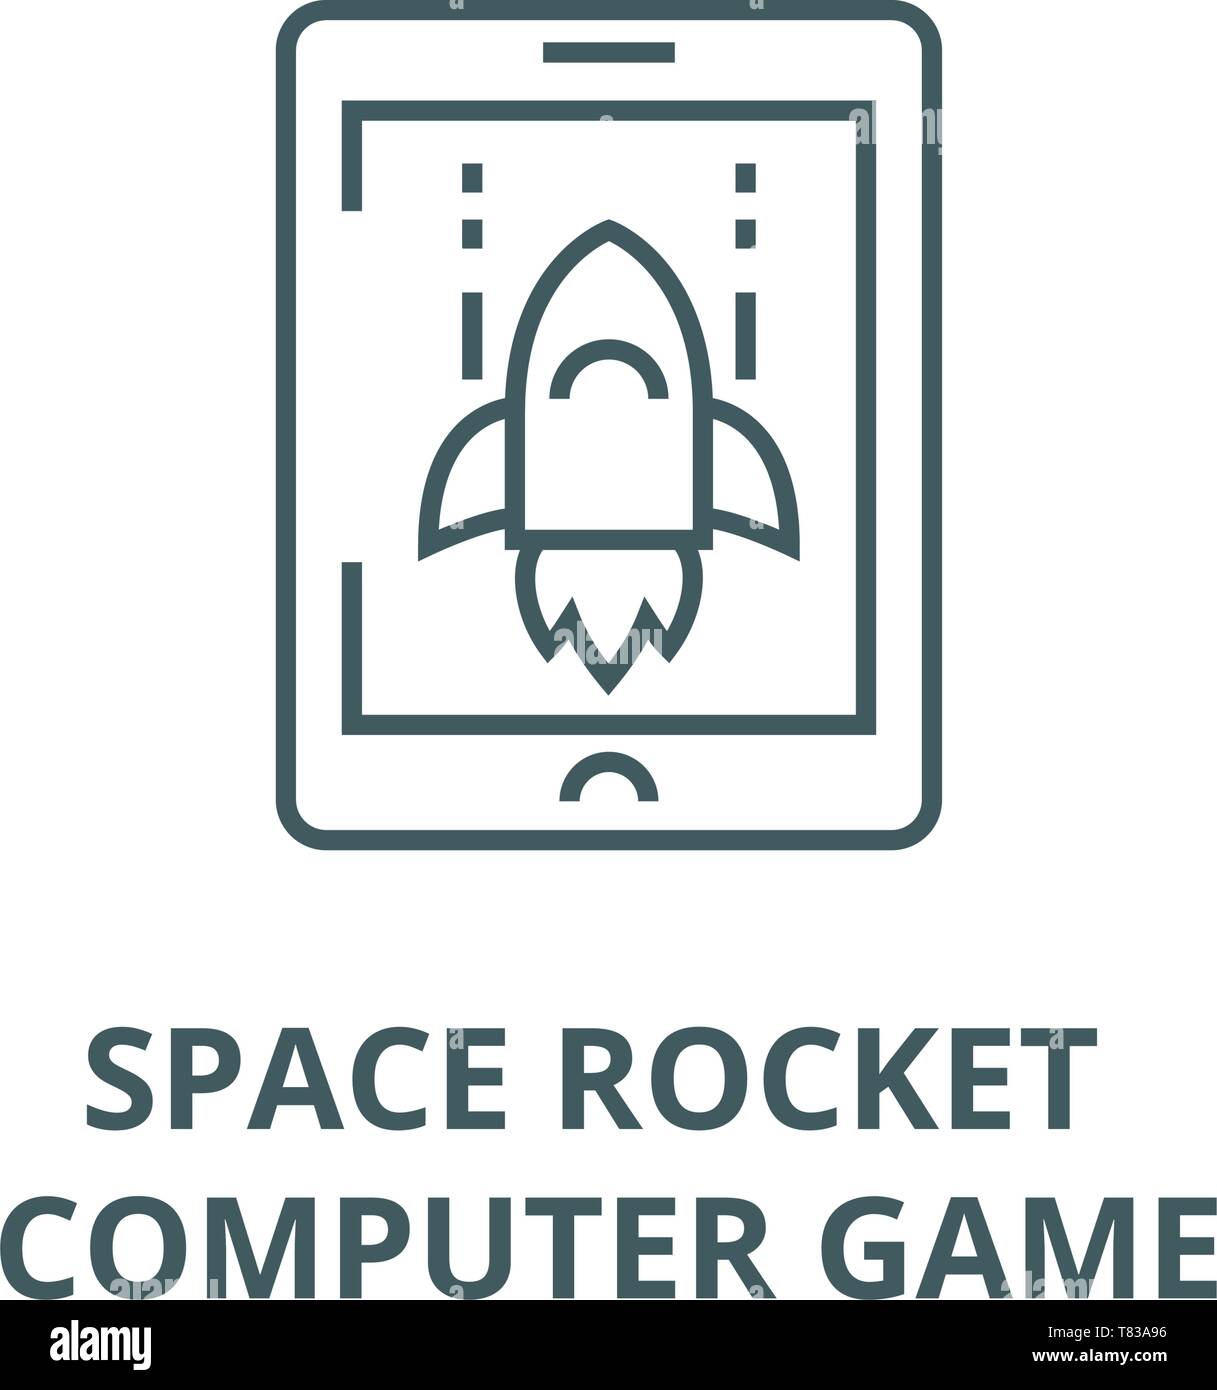 Space rocket computer game vector line icon, linear concept, outline sign, symbol Stock Vector